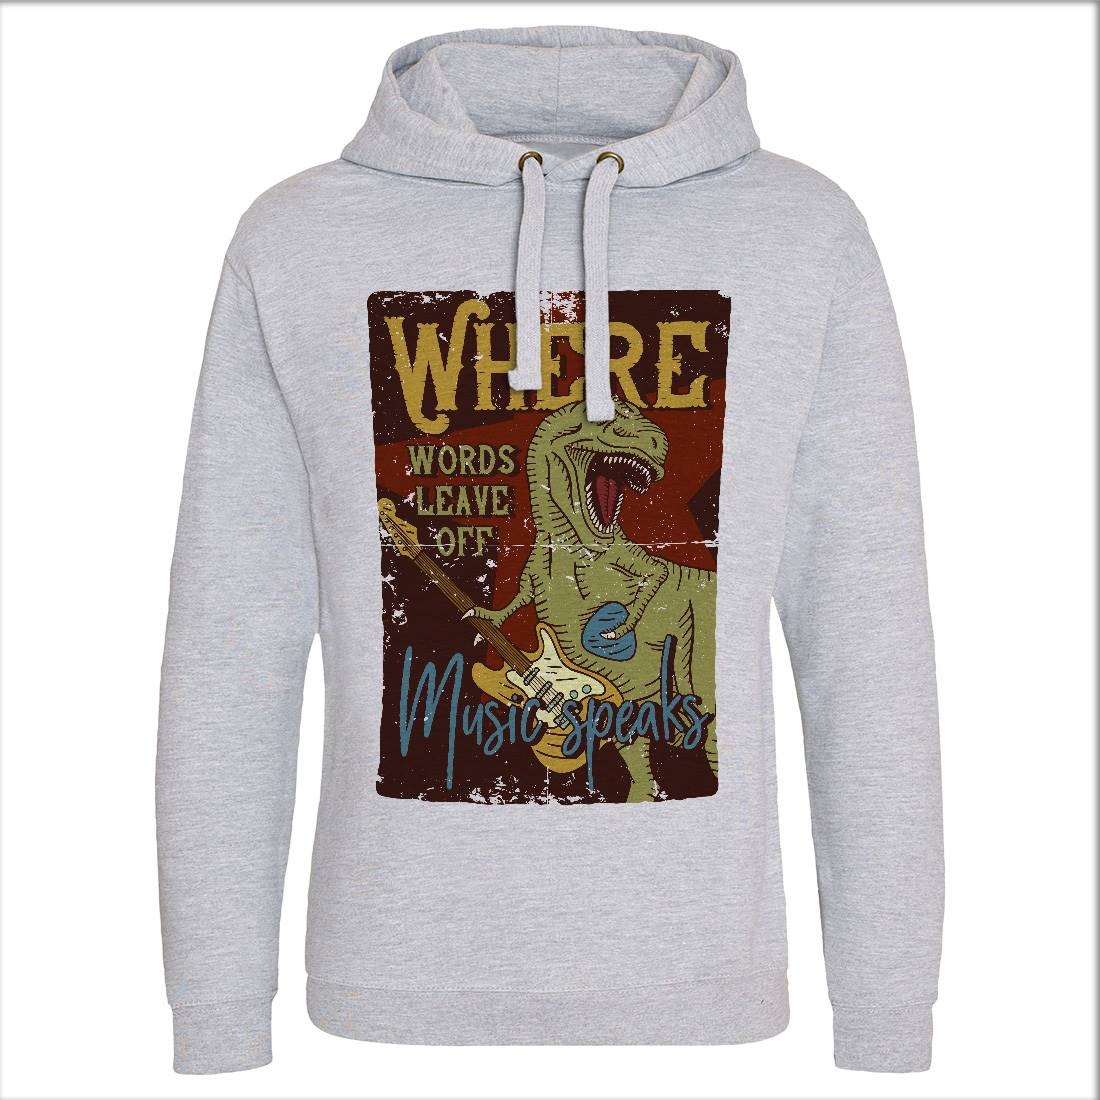 T-Rex Mens Hoodie Without Pocket Music B361